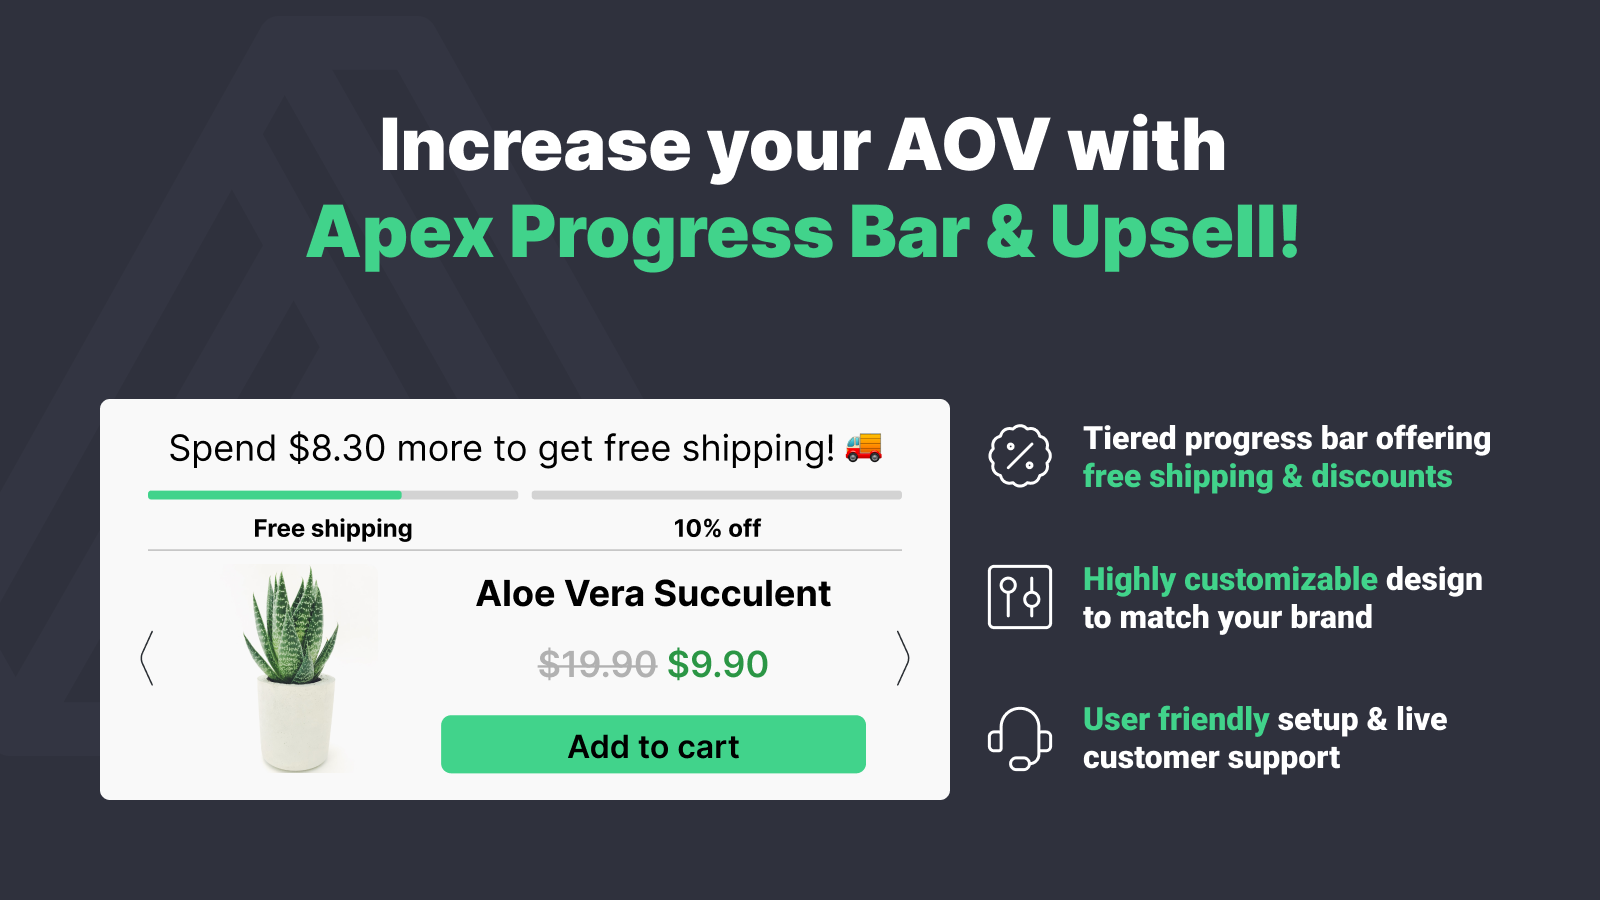 Increase your AOV with Apex Progress Bar & Upsell